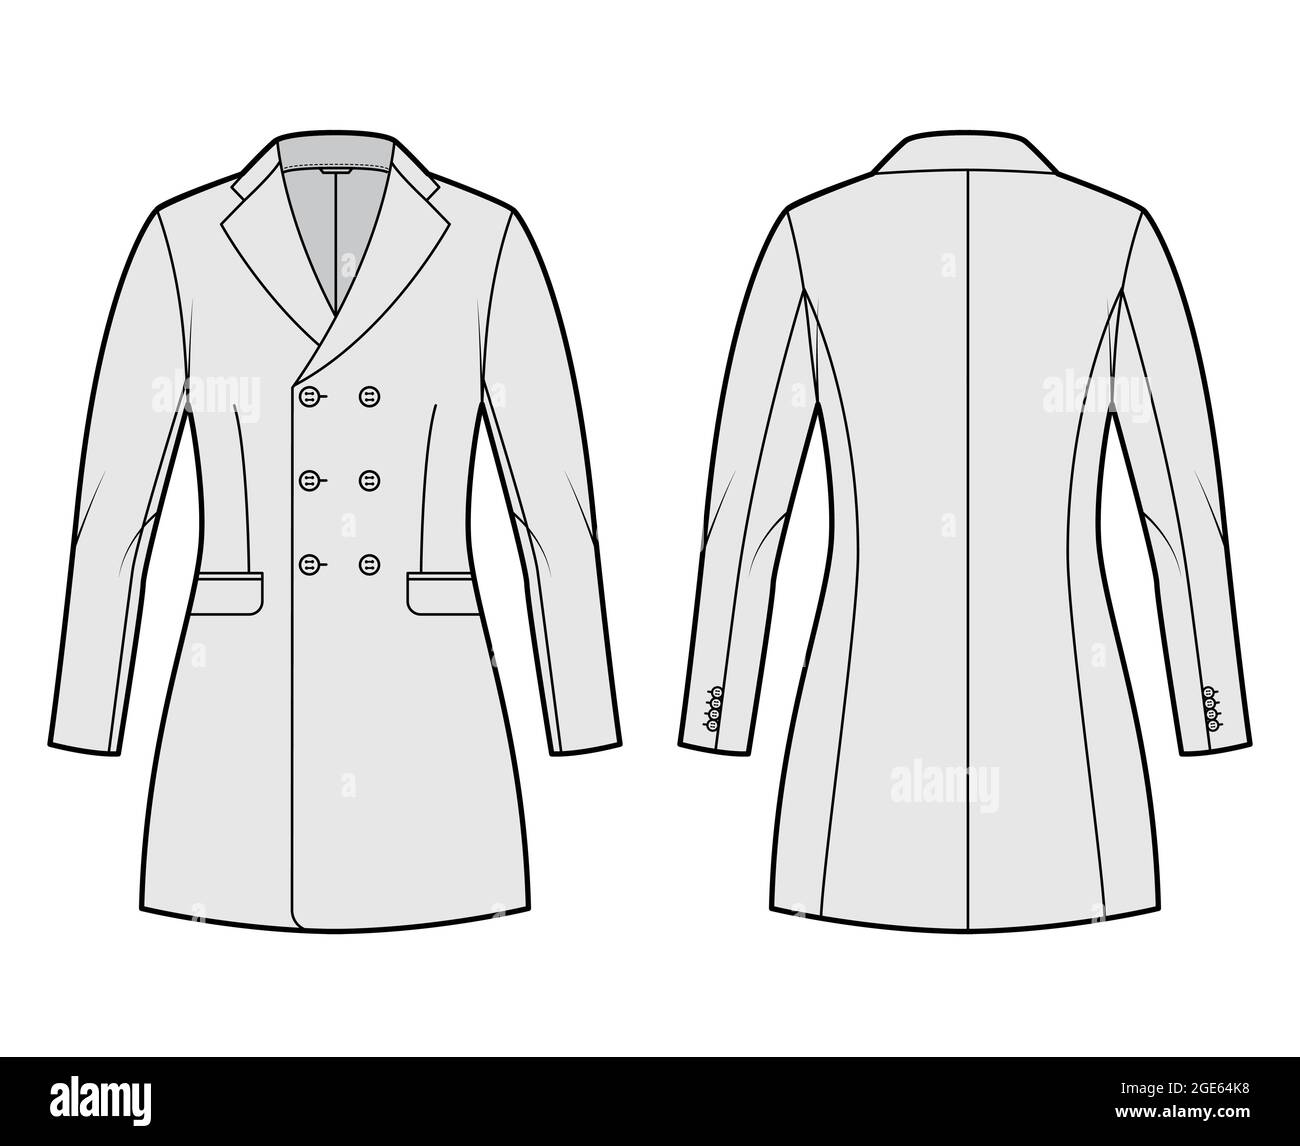 Fitted jacket double breasted suit technical fashion illustration with ...